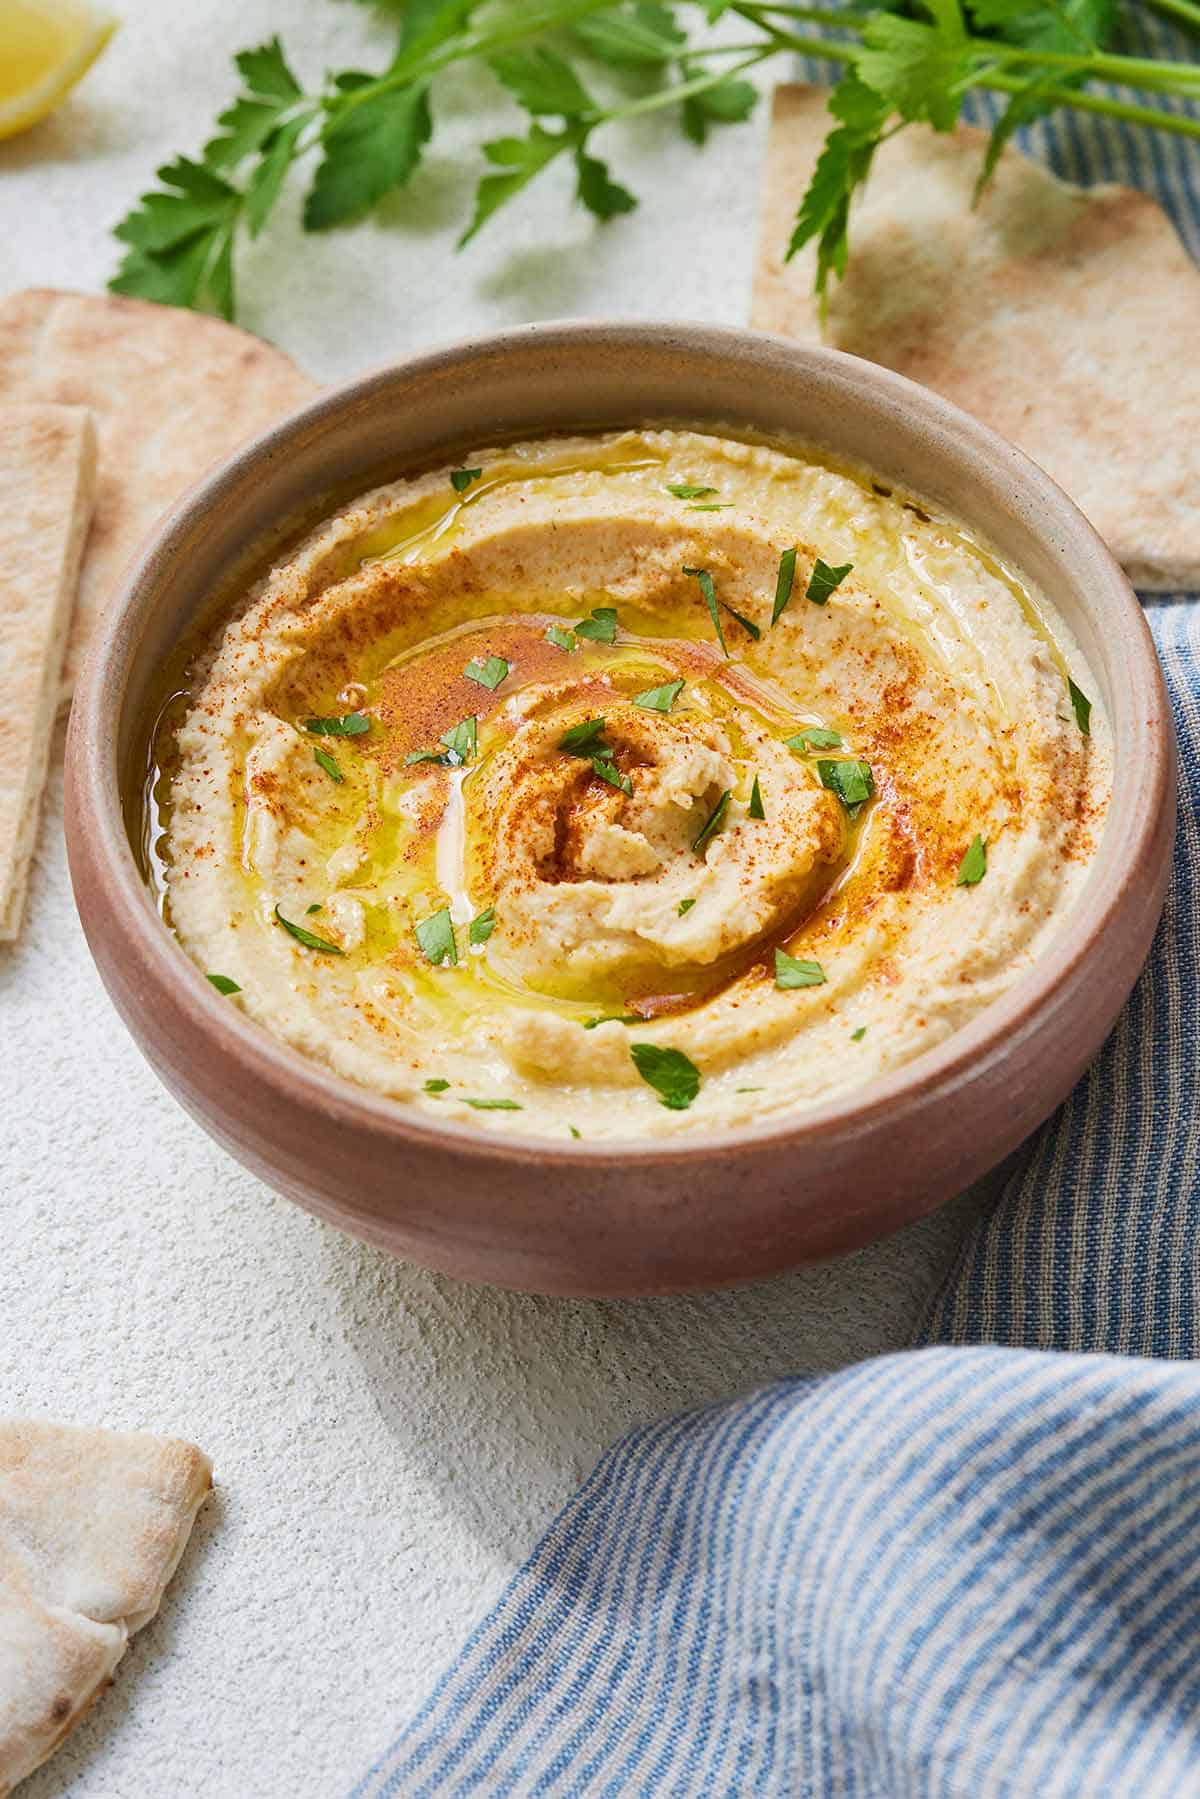 A bowl of hummus garnished with fresh herbs, paprika, and olive oil.